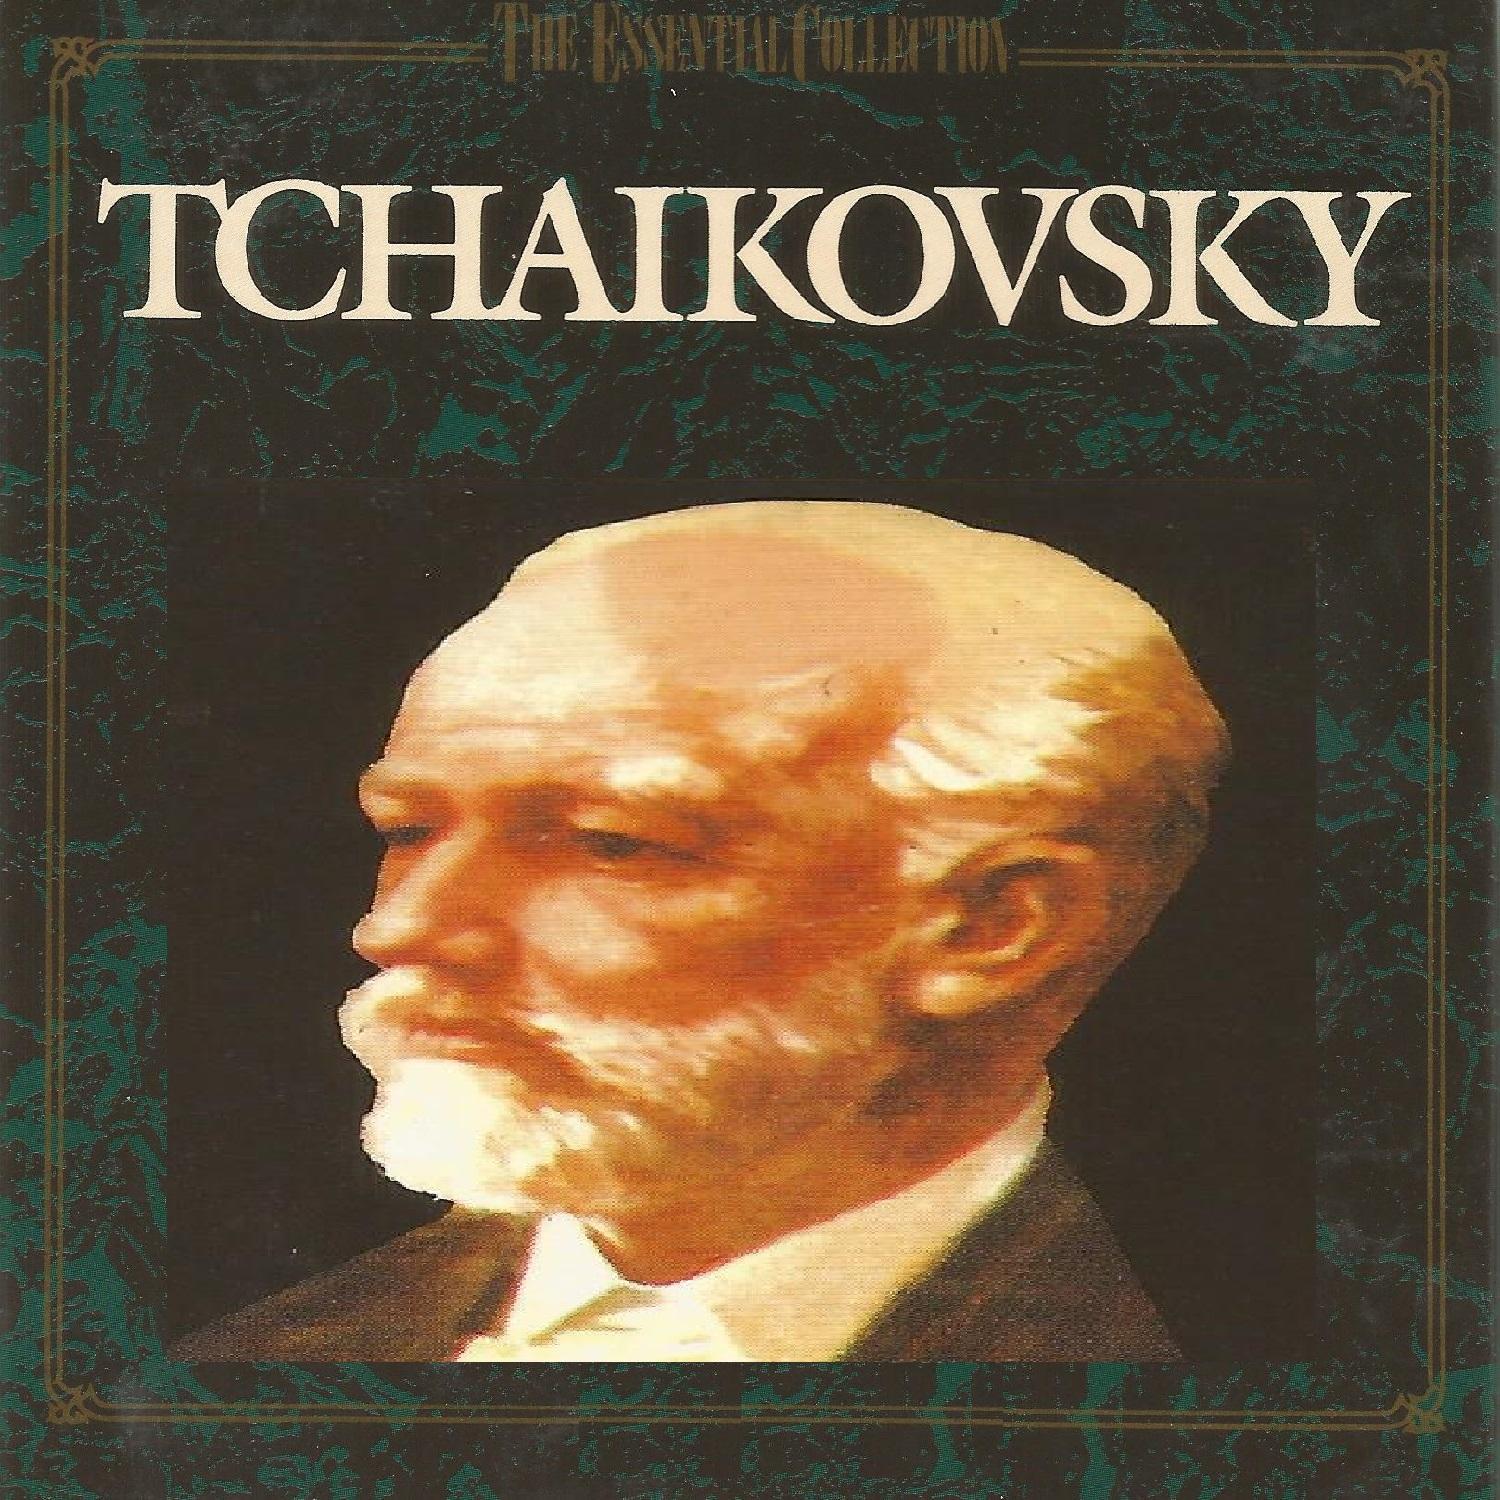 Tchaikovsky, The Essential Collection